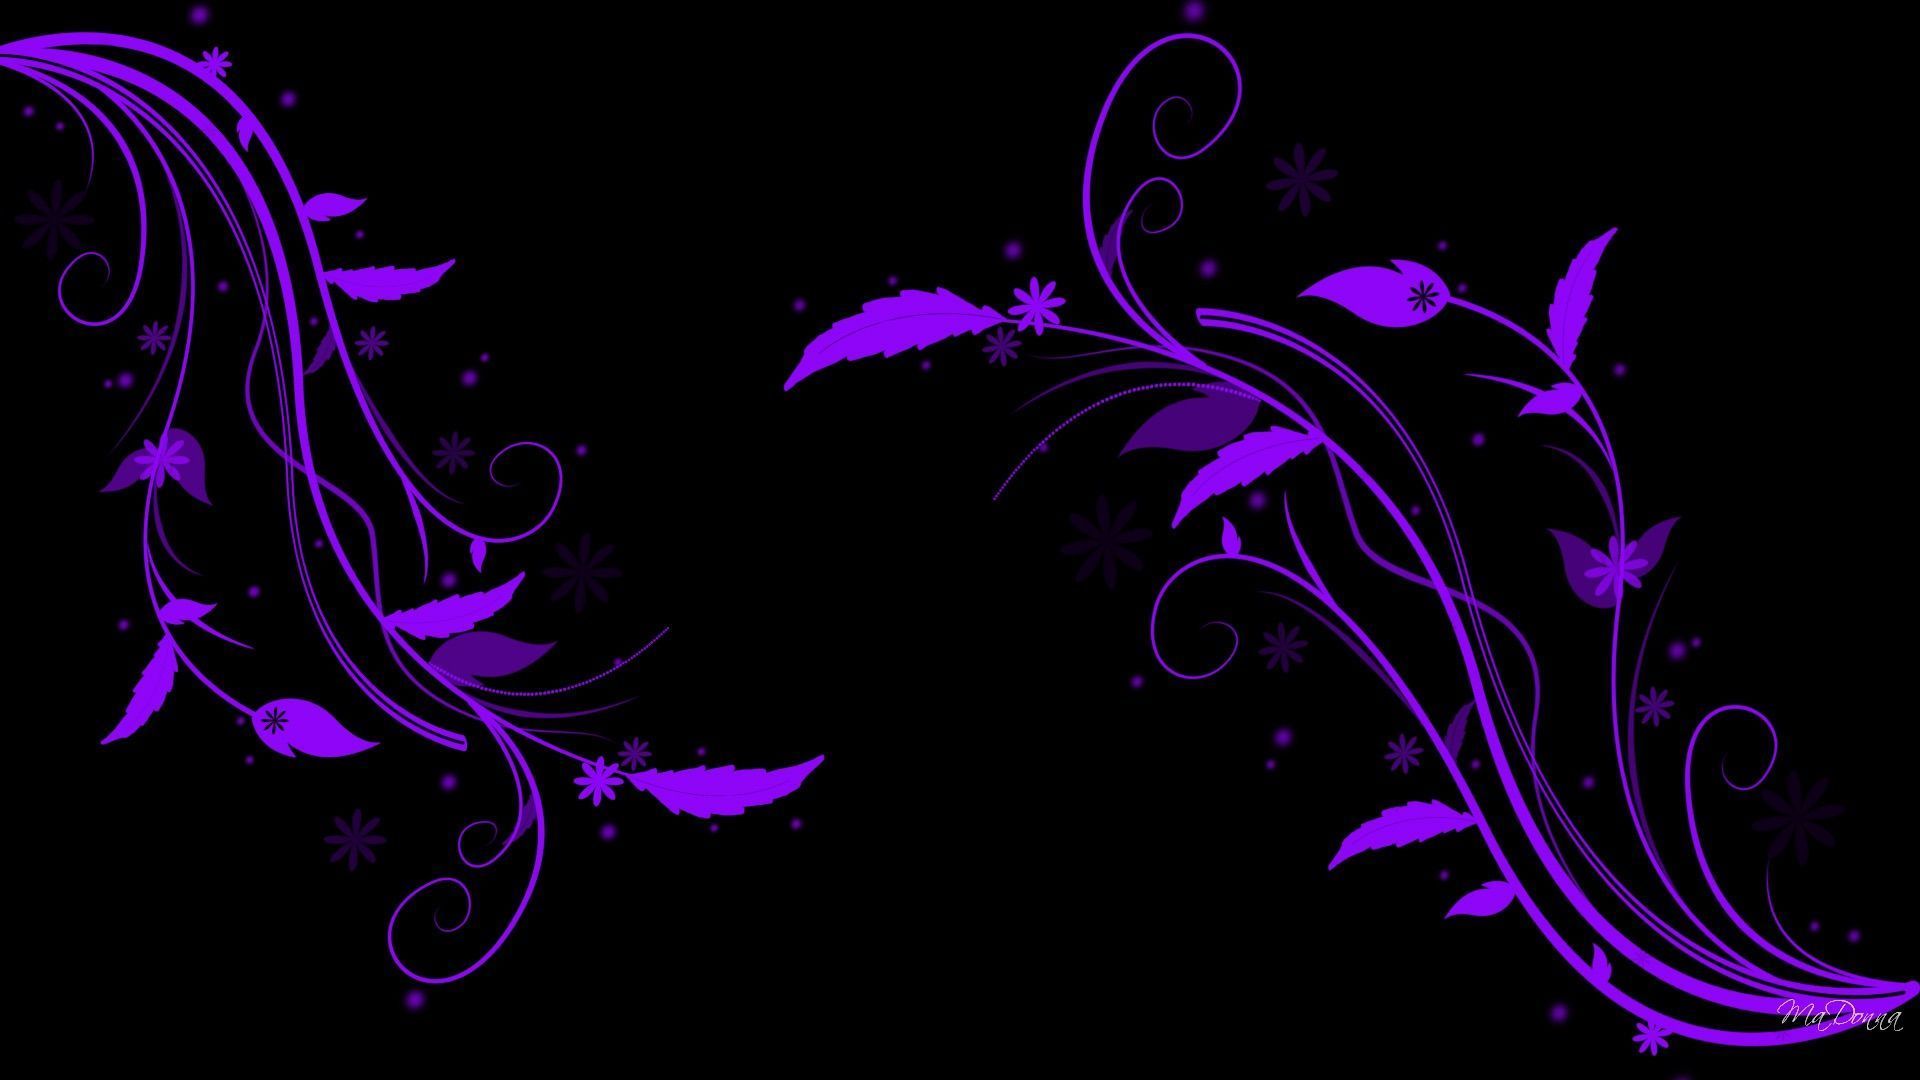 Black White And Purple Wallpaper - All Wallpapers New